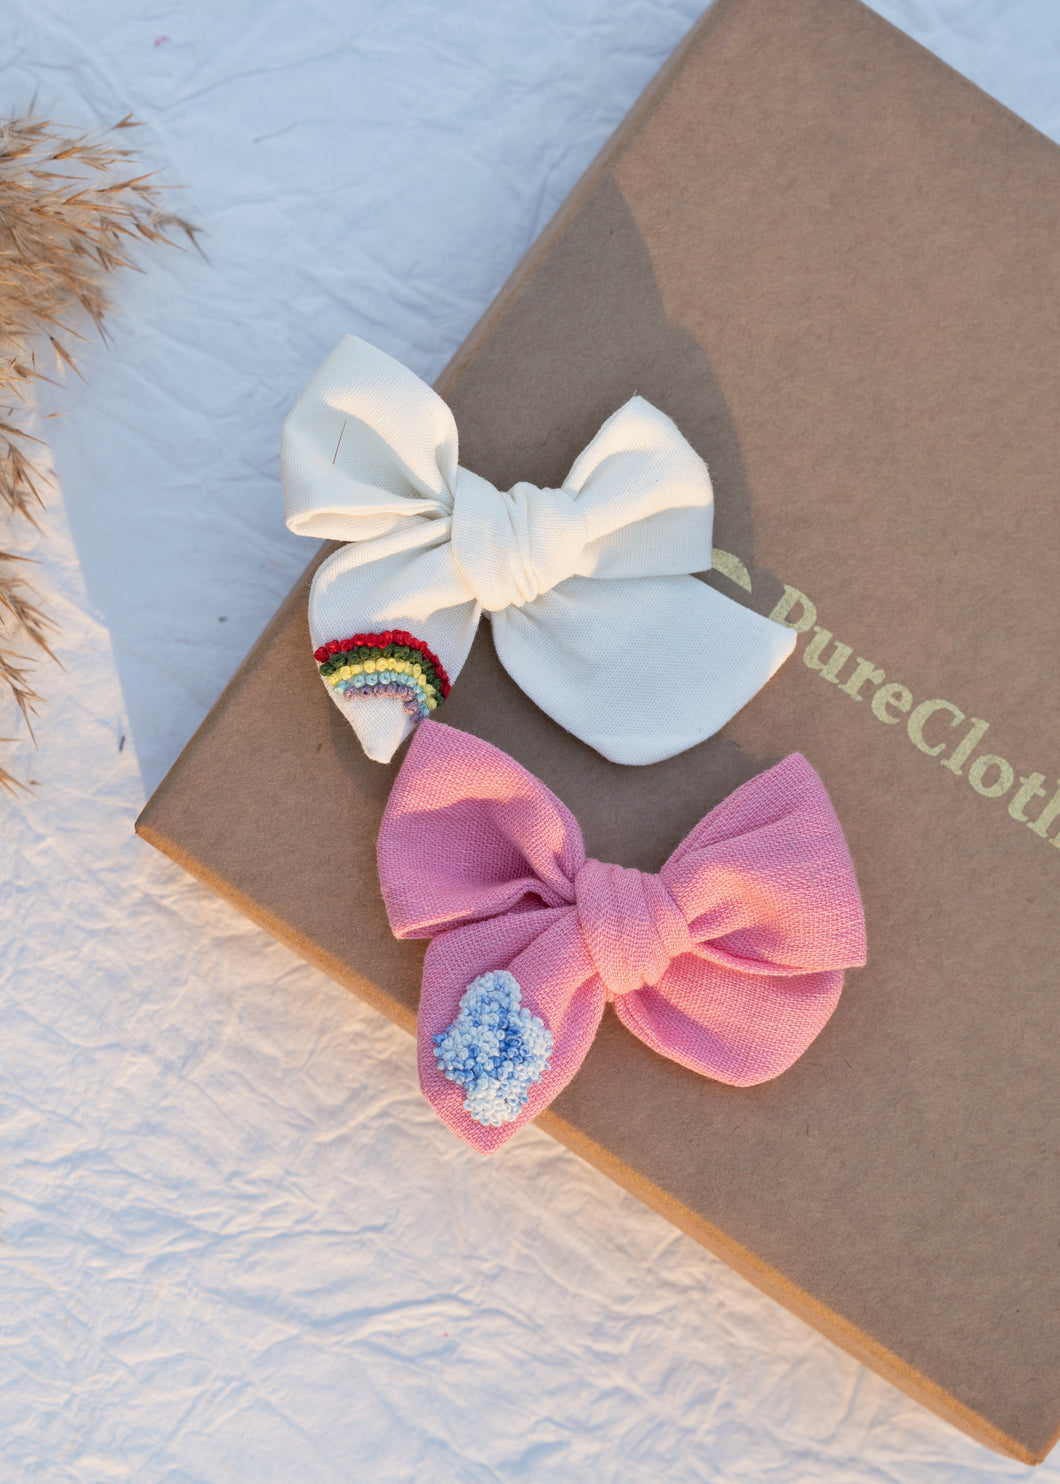 Two (Off-white and Pink) Hair Clips tied to one another on top of a box.